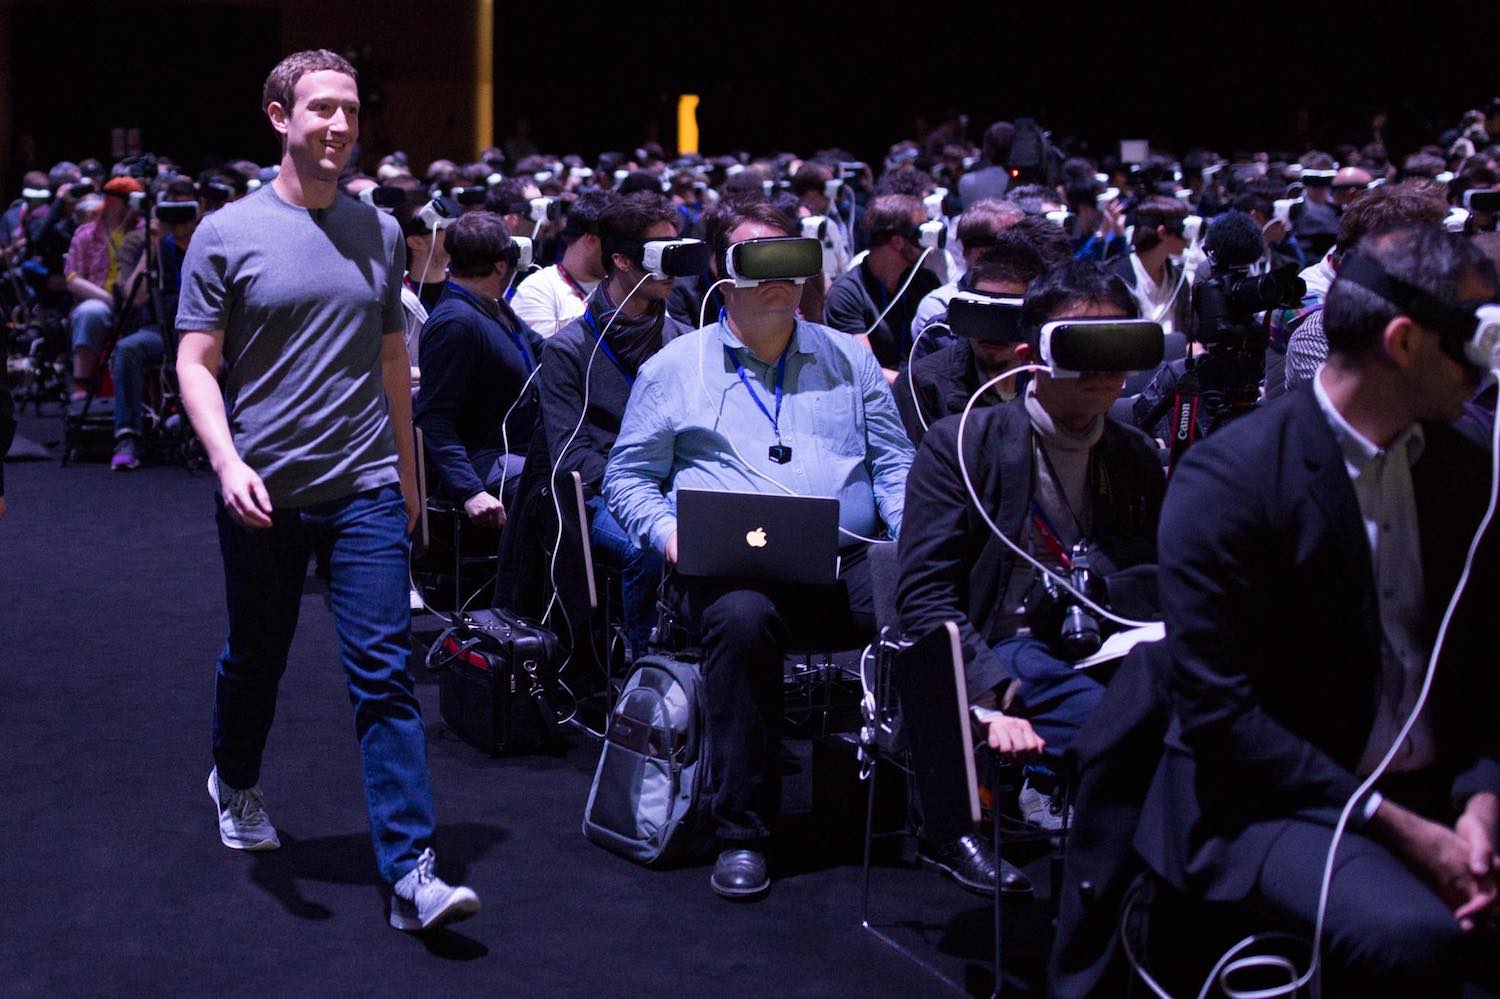 Facebook CEO Mark Zuckerberg at MWC 2016, with the Gear VR headset.